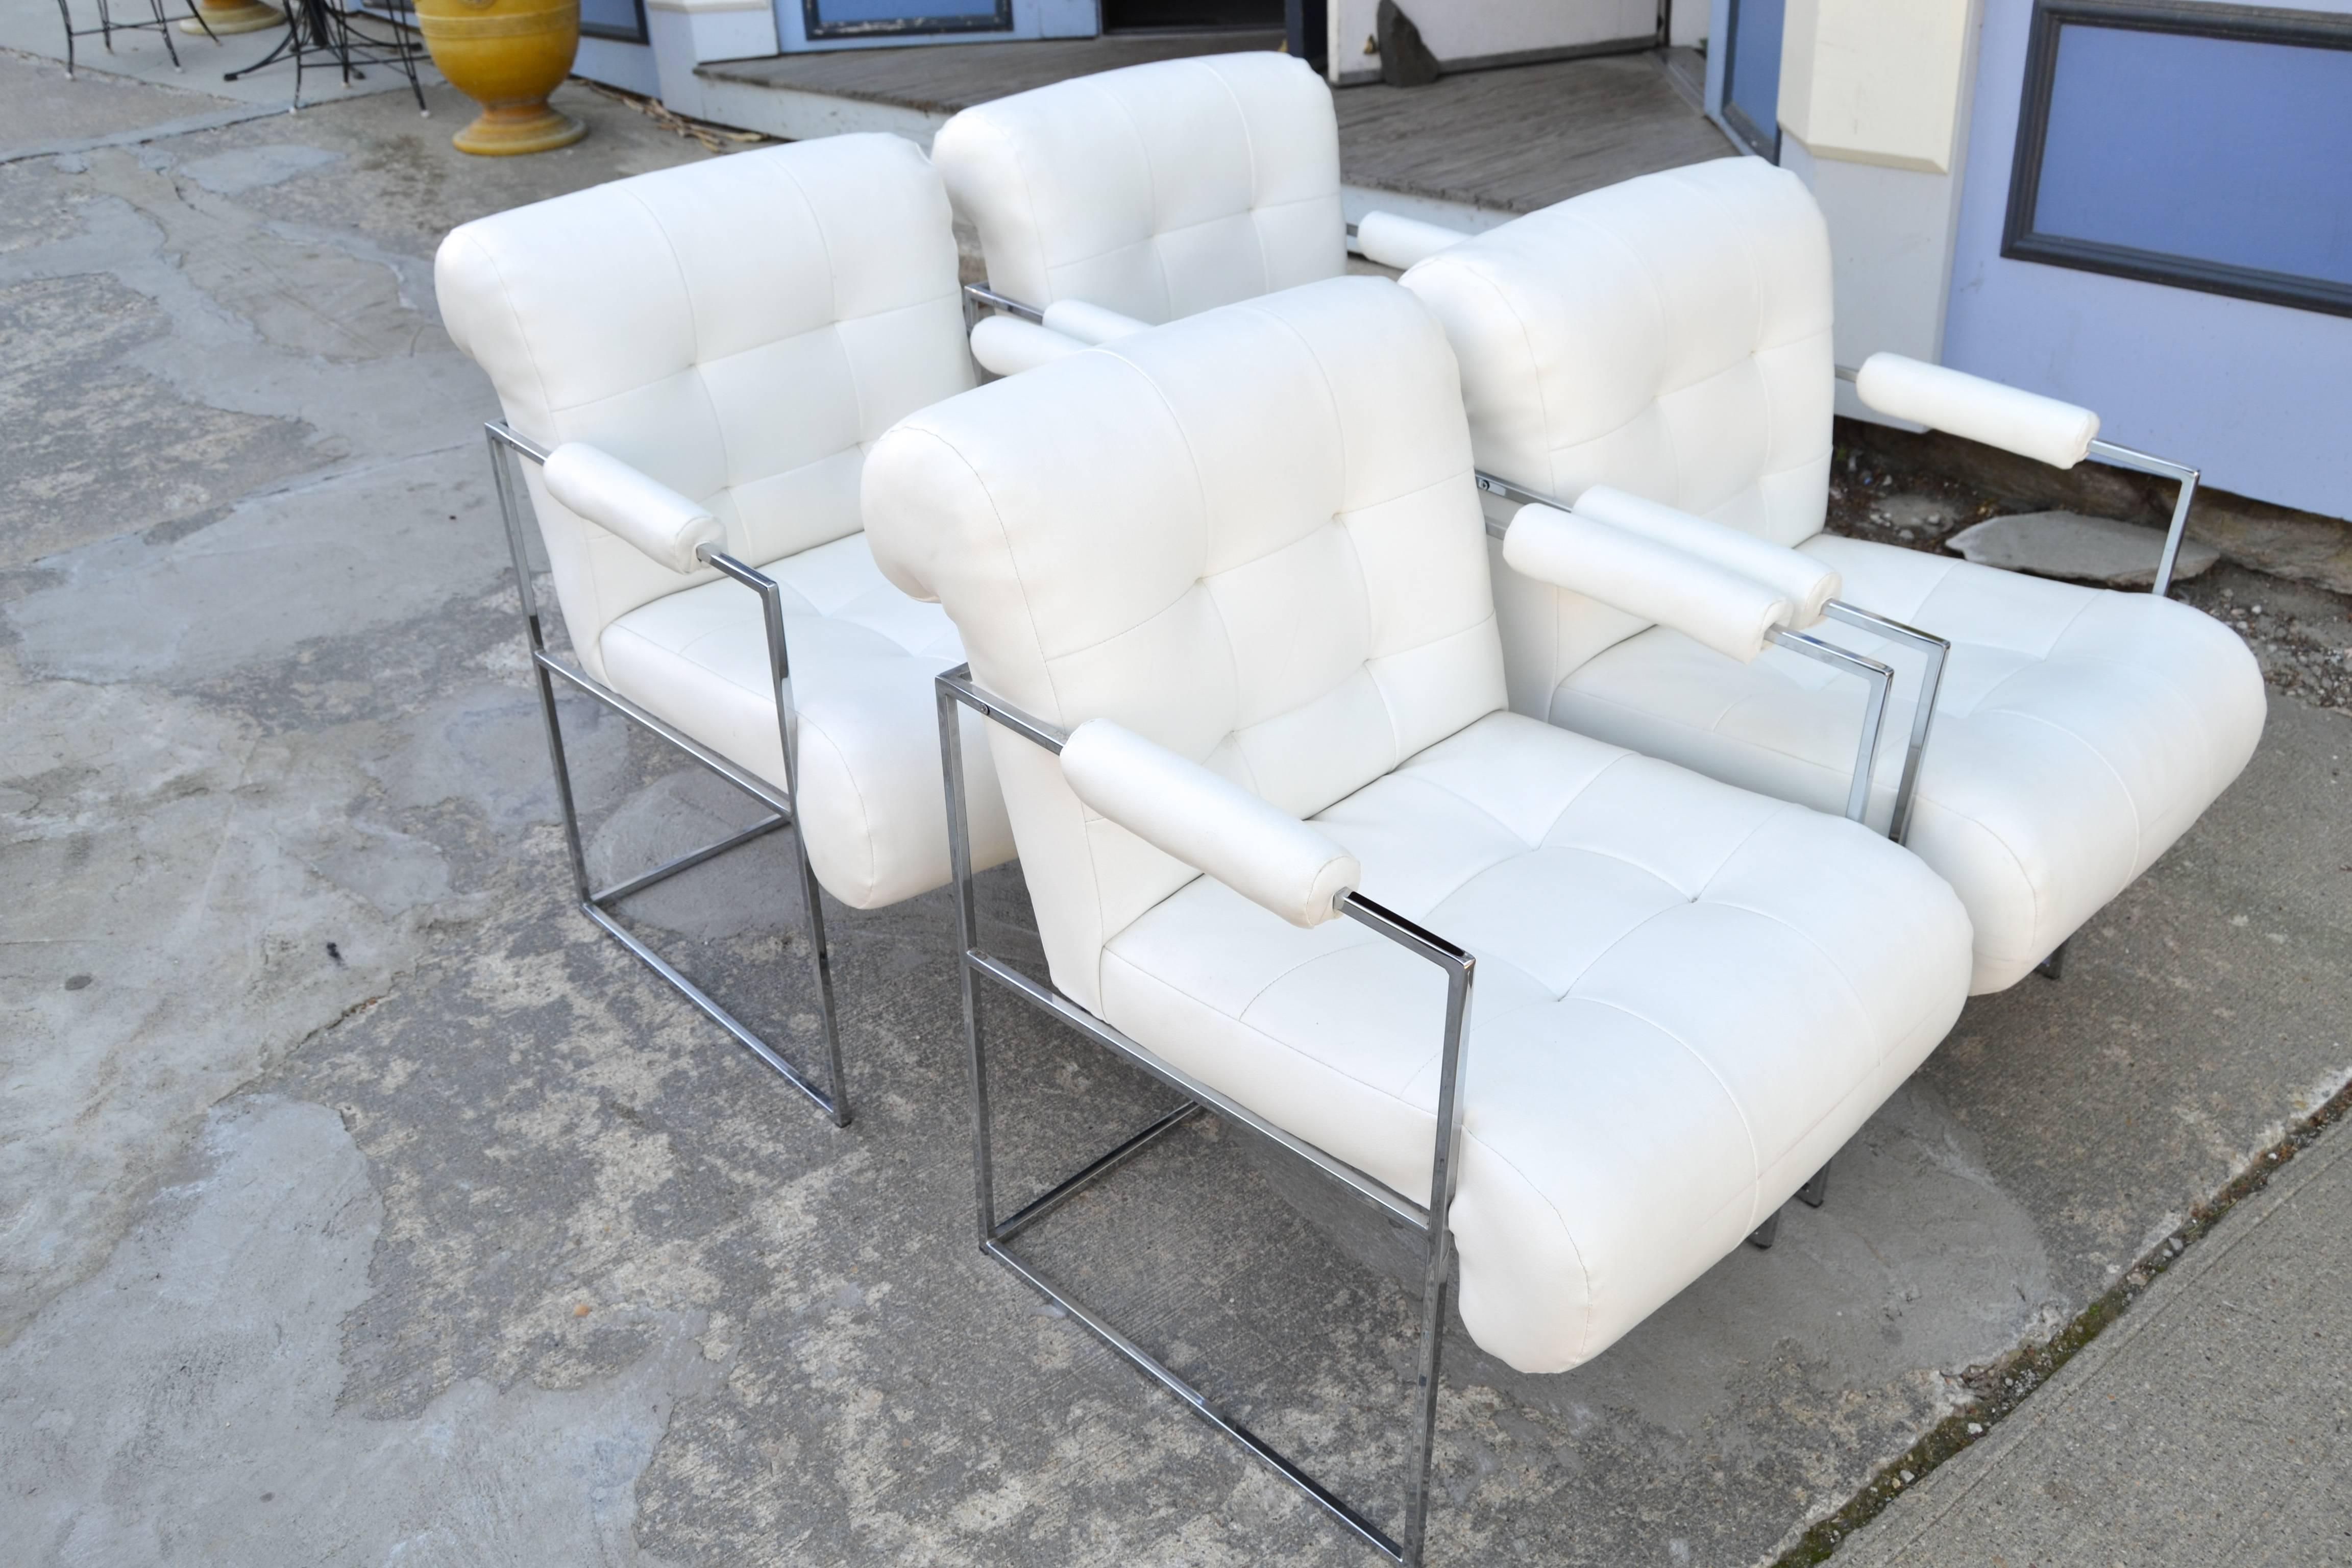 Four white Naugahyde chrome arm chairs by Milo Baughman for Thayer Coggin.
Biscuit tufted and extremely comfortable, these Mid-Century dining chairs have a rolled back and padded arm rests. The chairs are also great as occasional chairs.